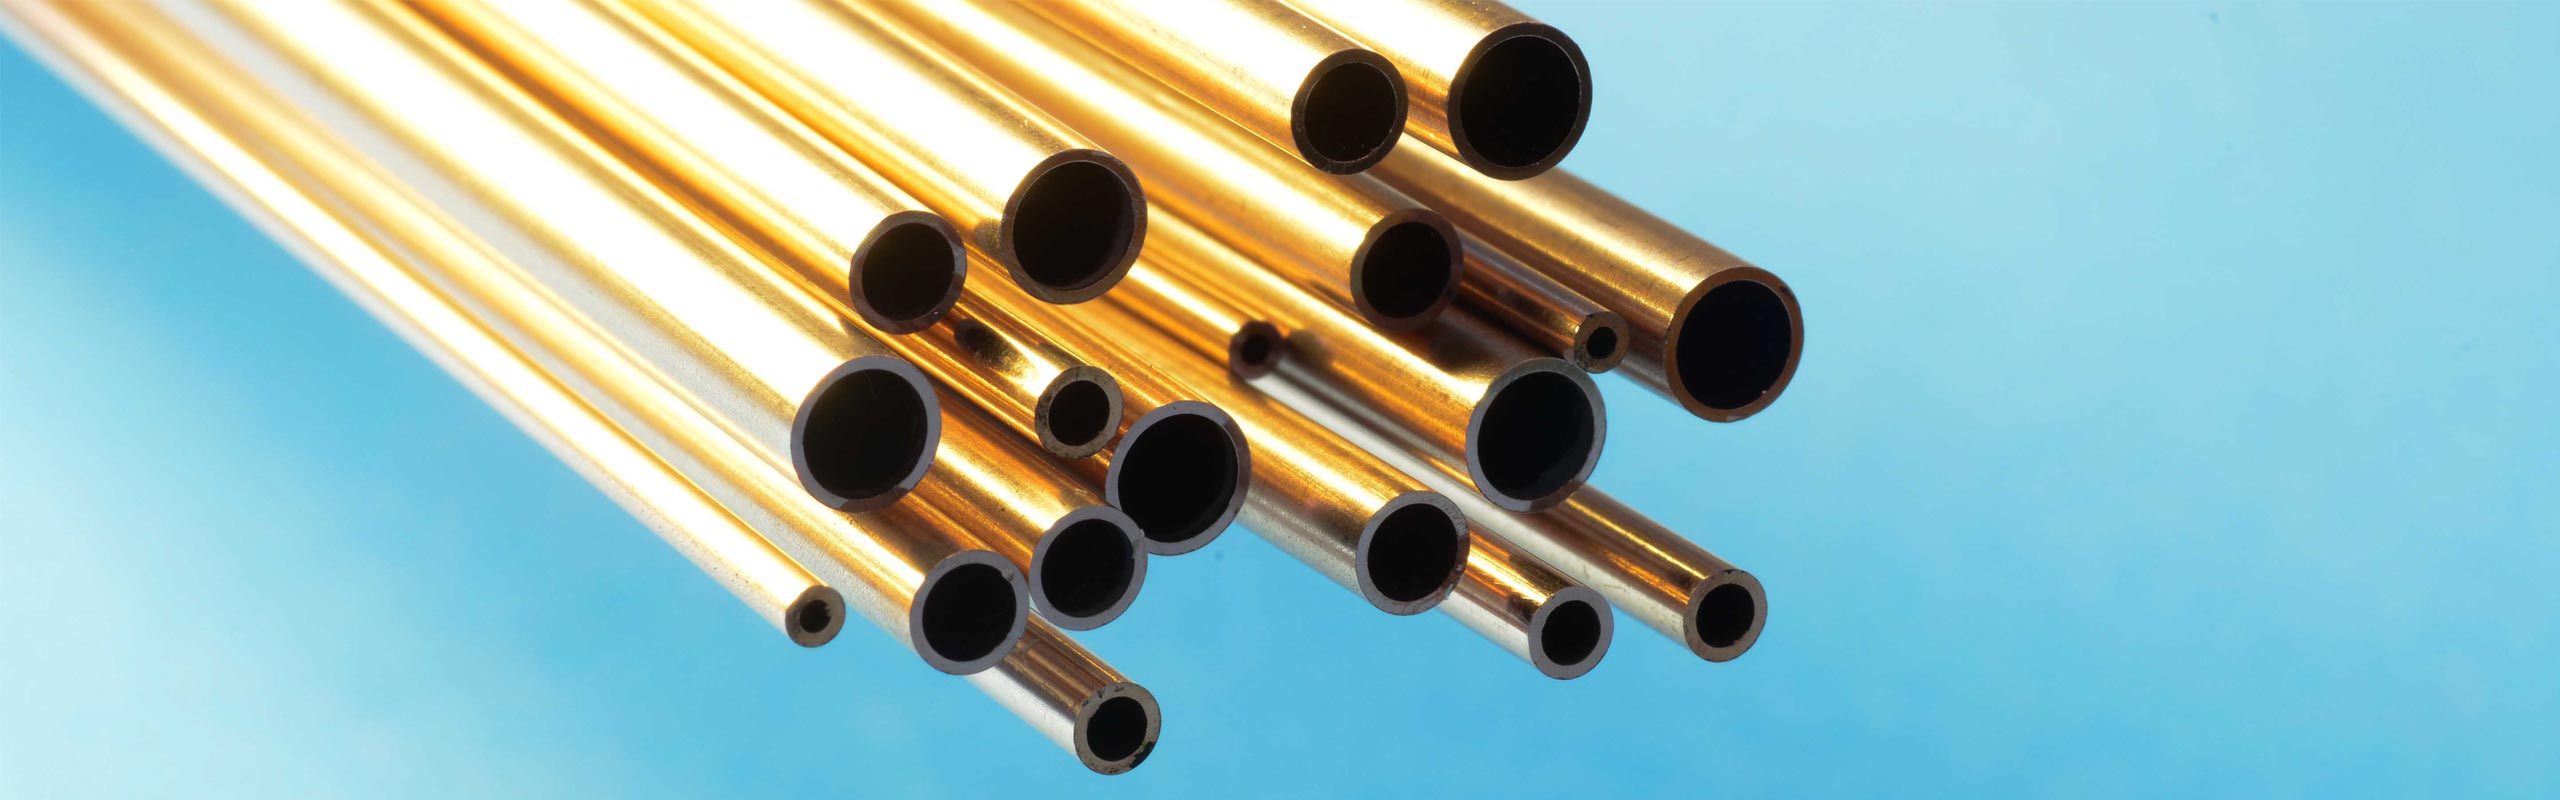 Albion Alloys Brass Round Rod 0.072" x 305 mm Long Ref: ABR10 Pack 5